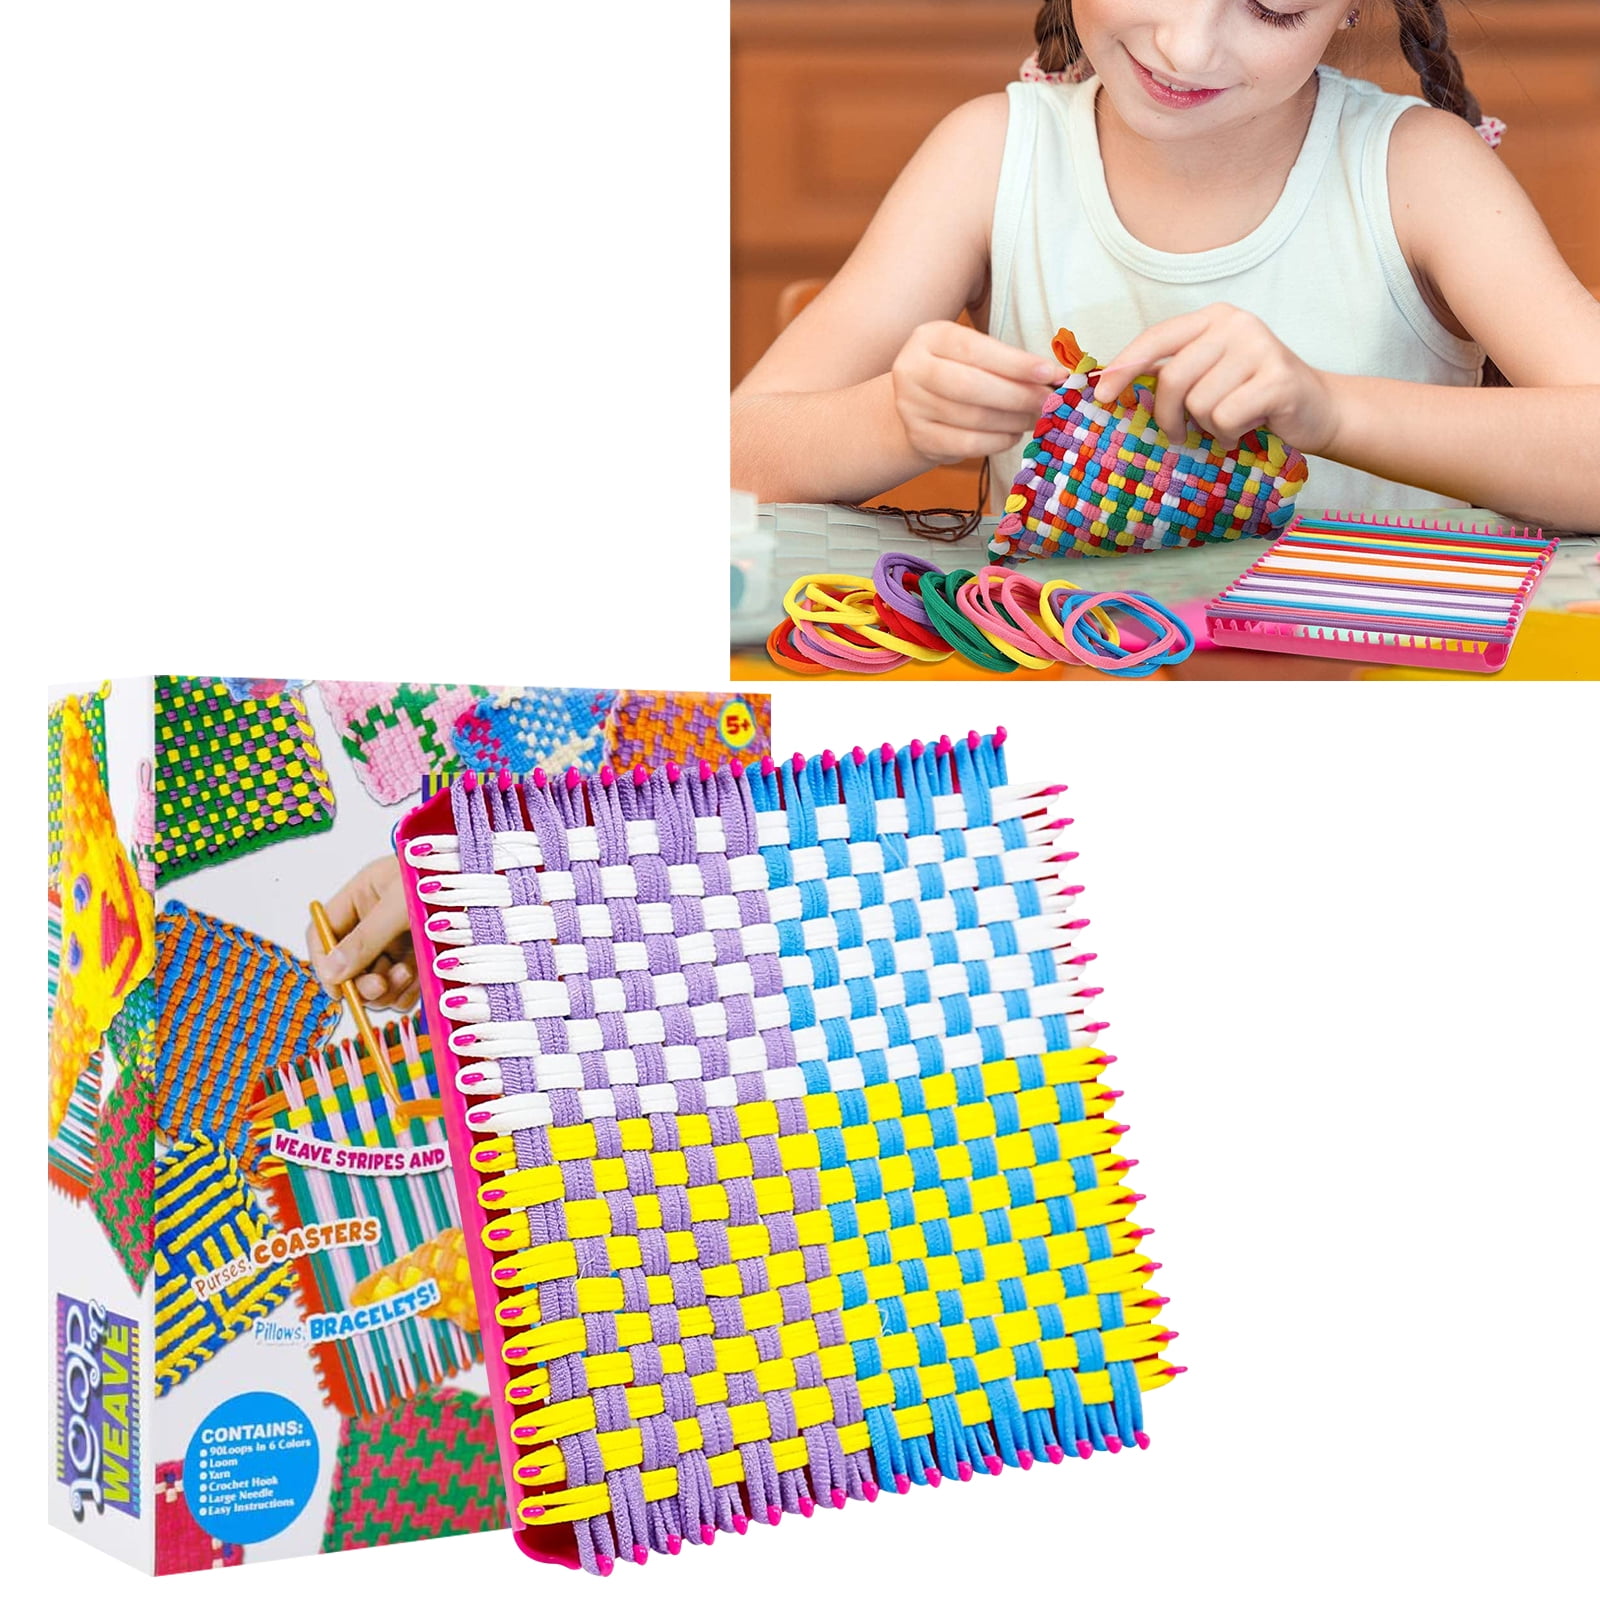 BUILPLAY Weaving Loom for Kids, Makes 7 potholders, 288 Loops in 8 Colors, Craft Kits for Girls Age 6+